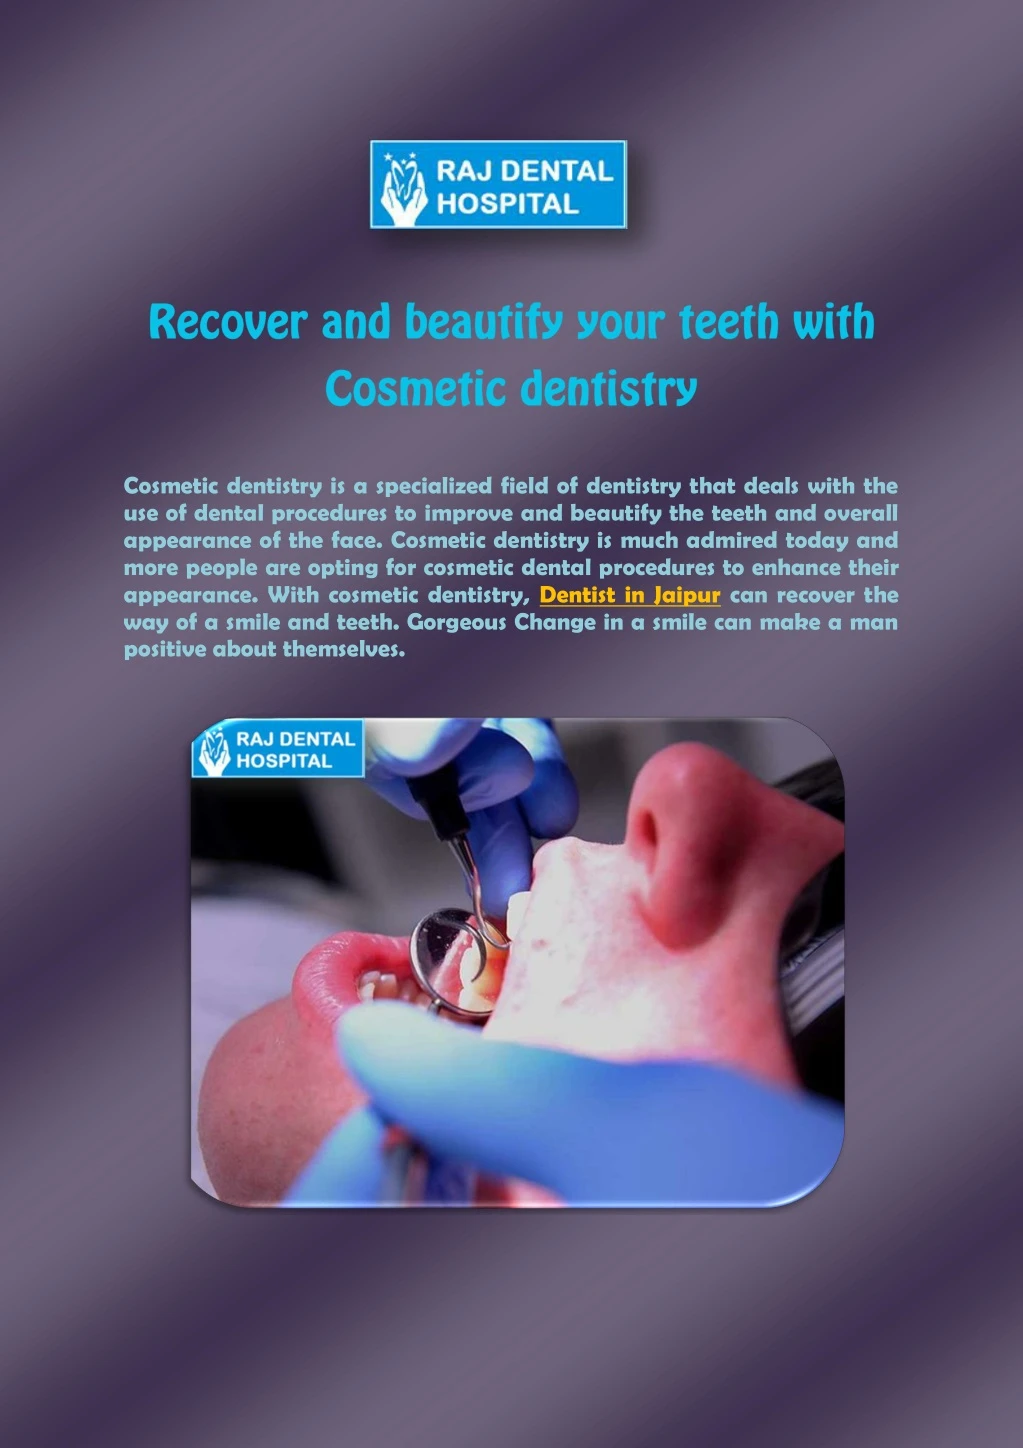 cosmetic dentistry is a specialized field